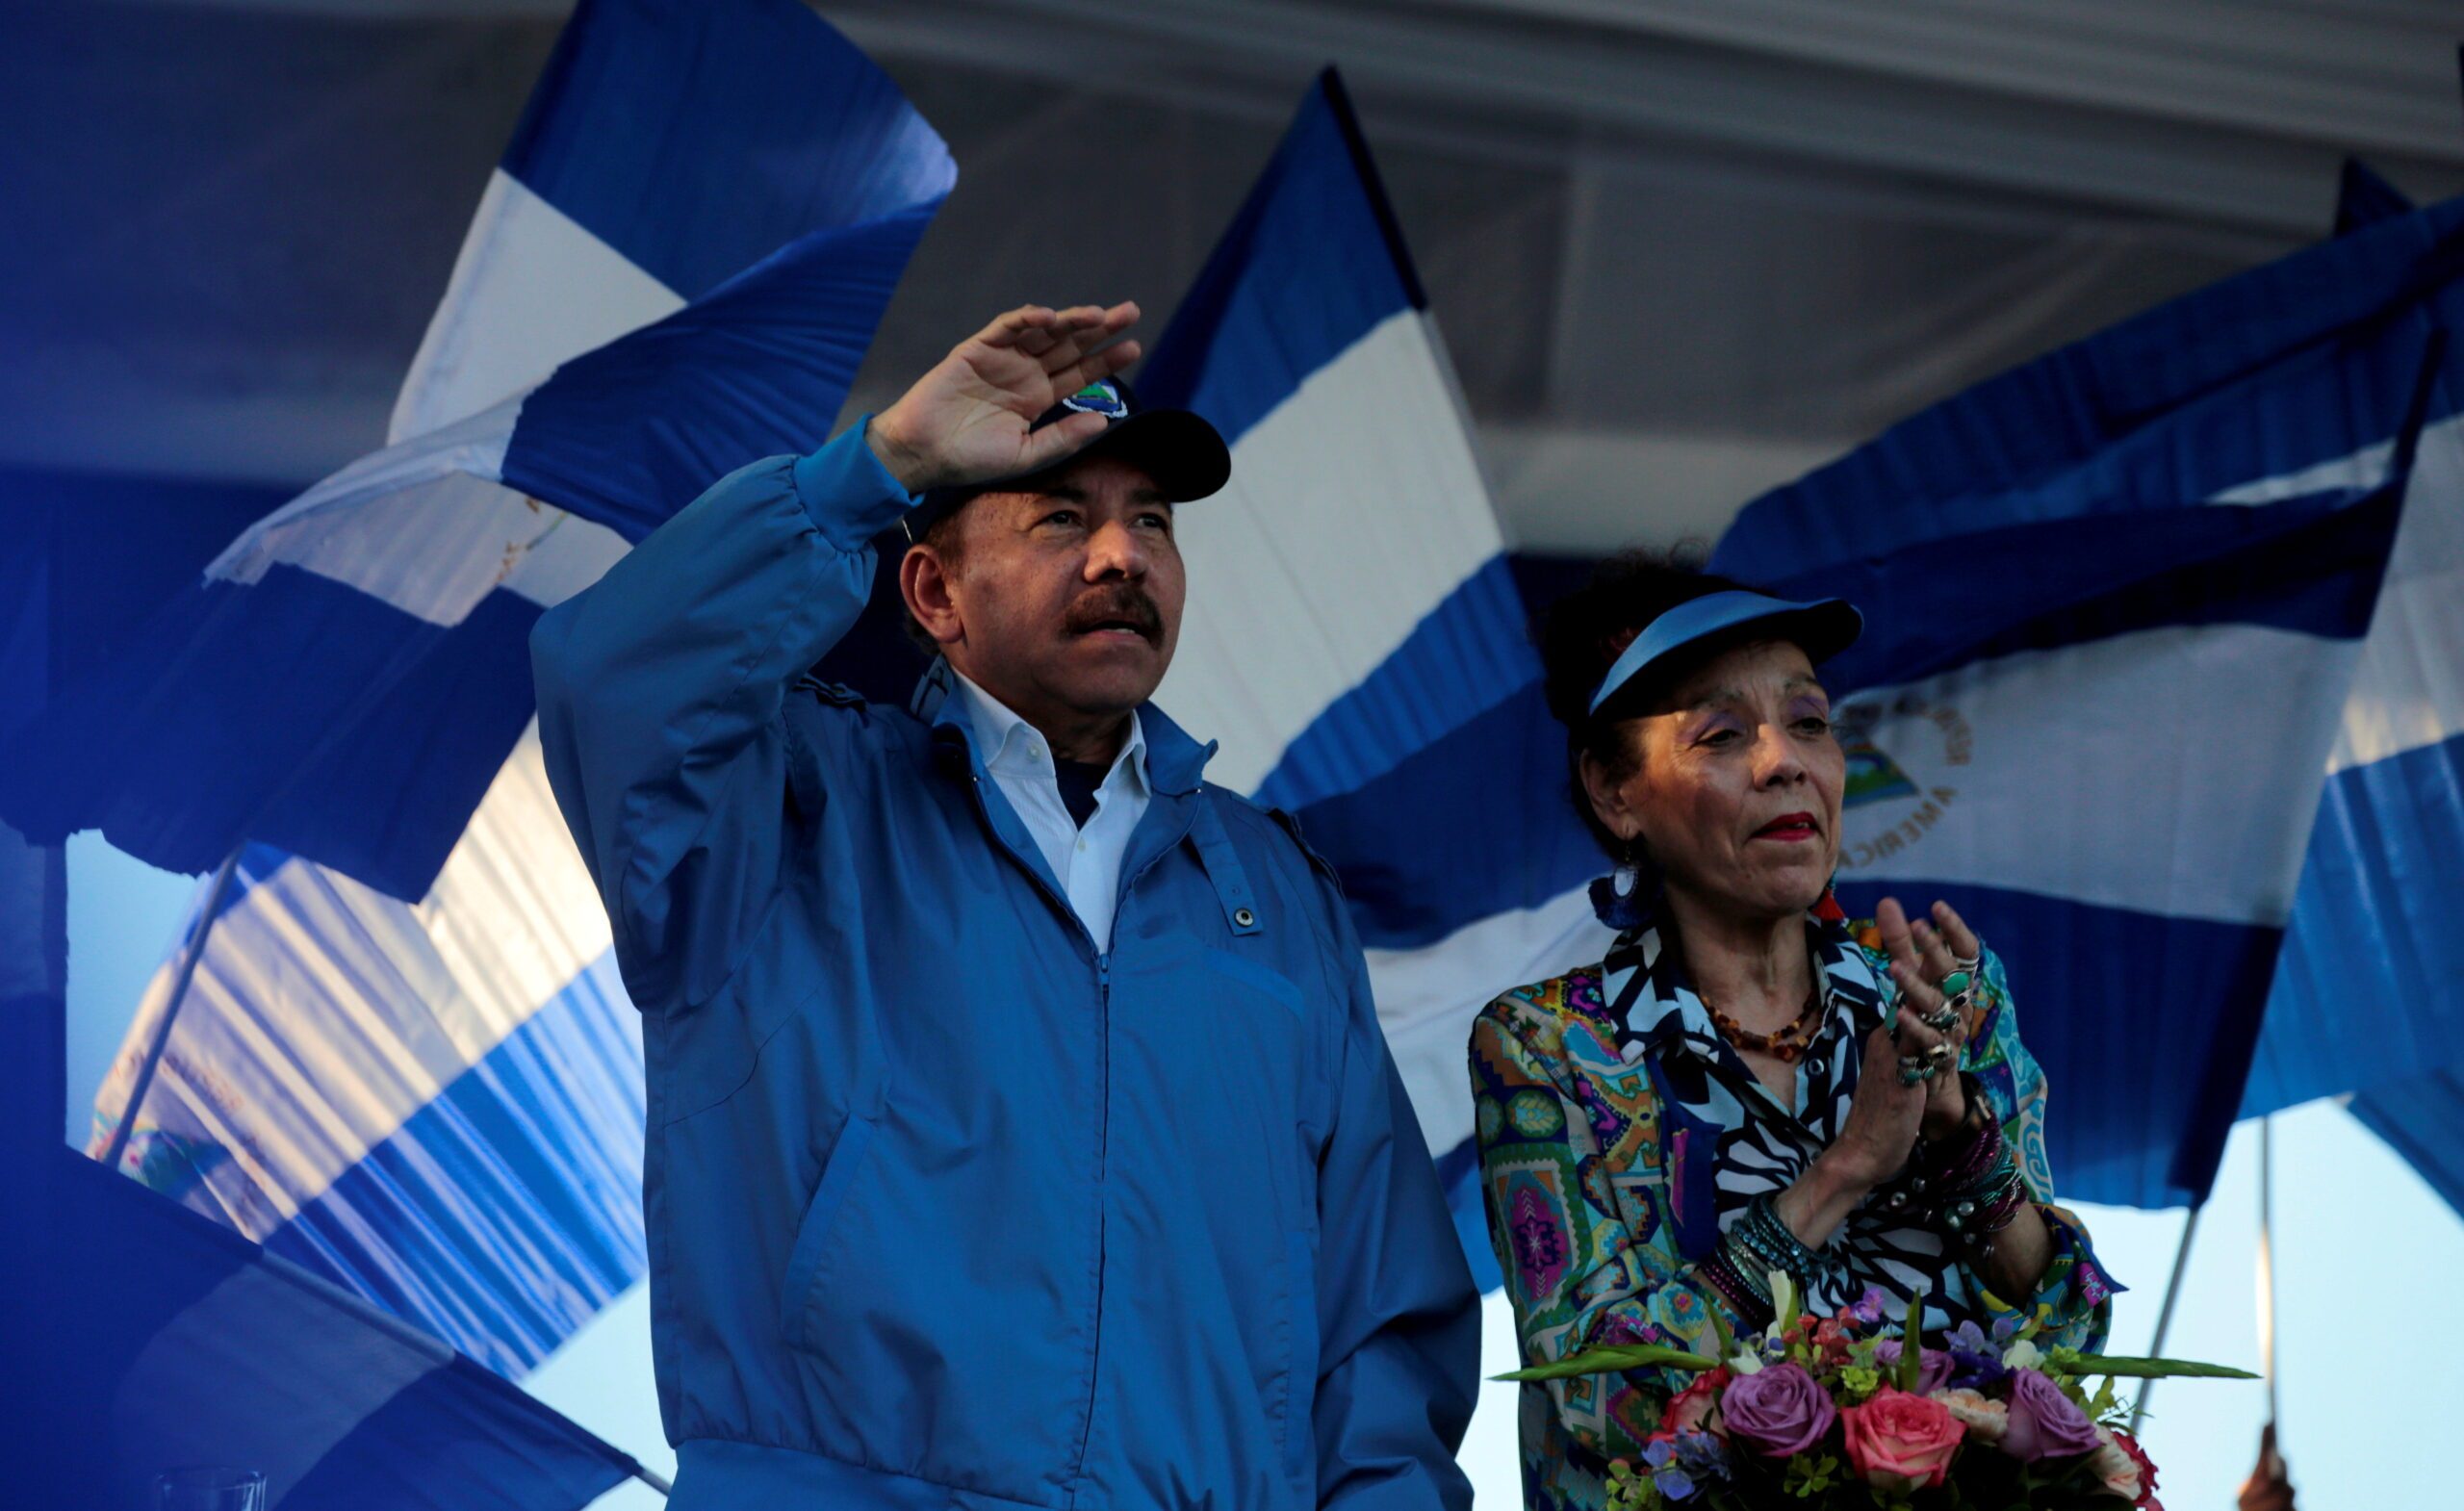 Nicaragua convicts businessmen in latest phase of political crackdown